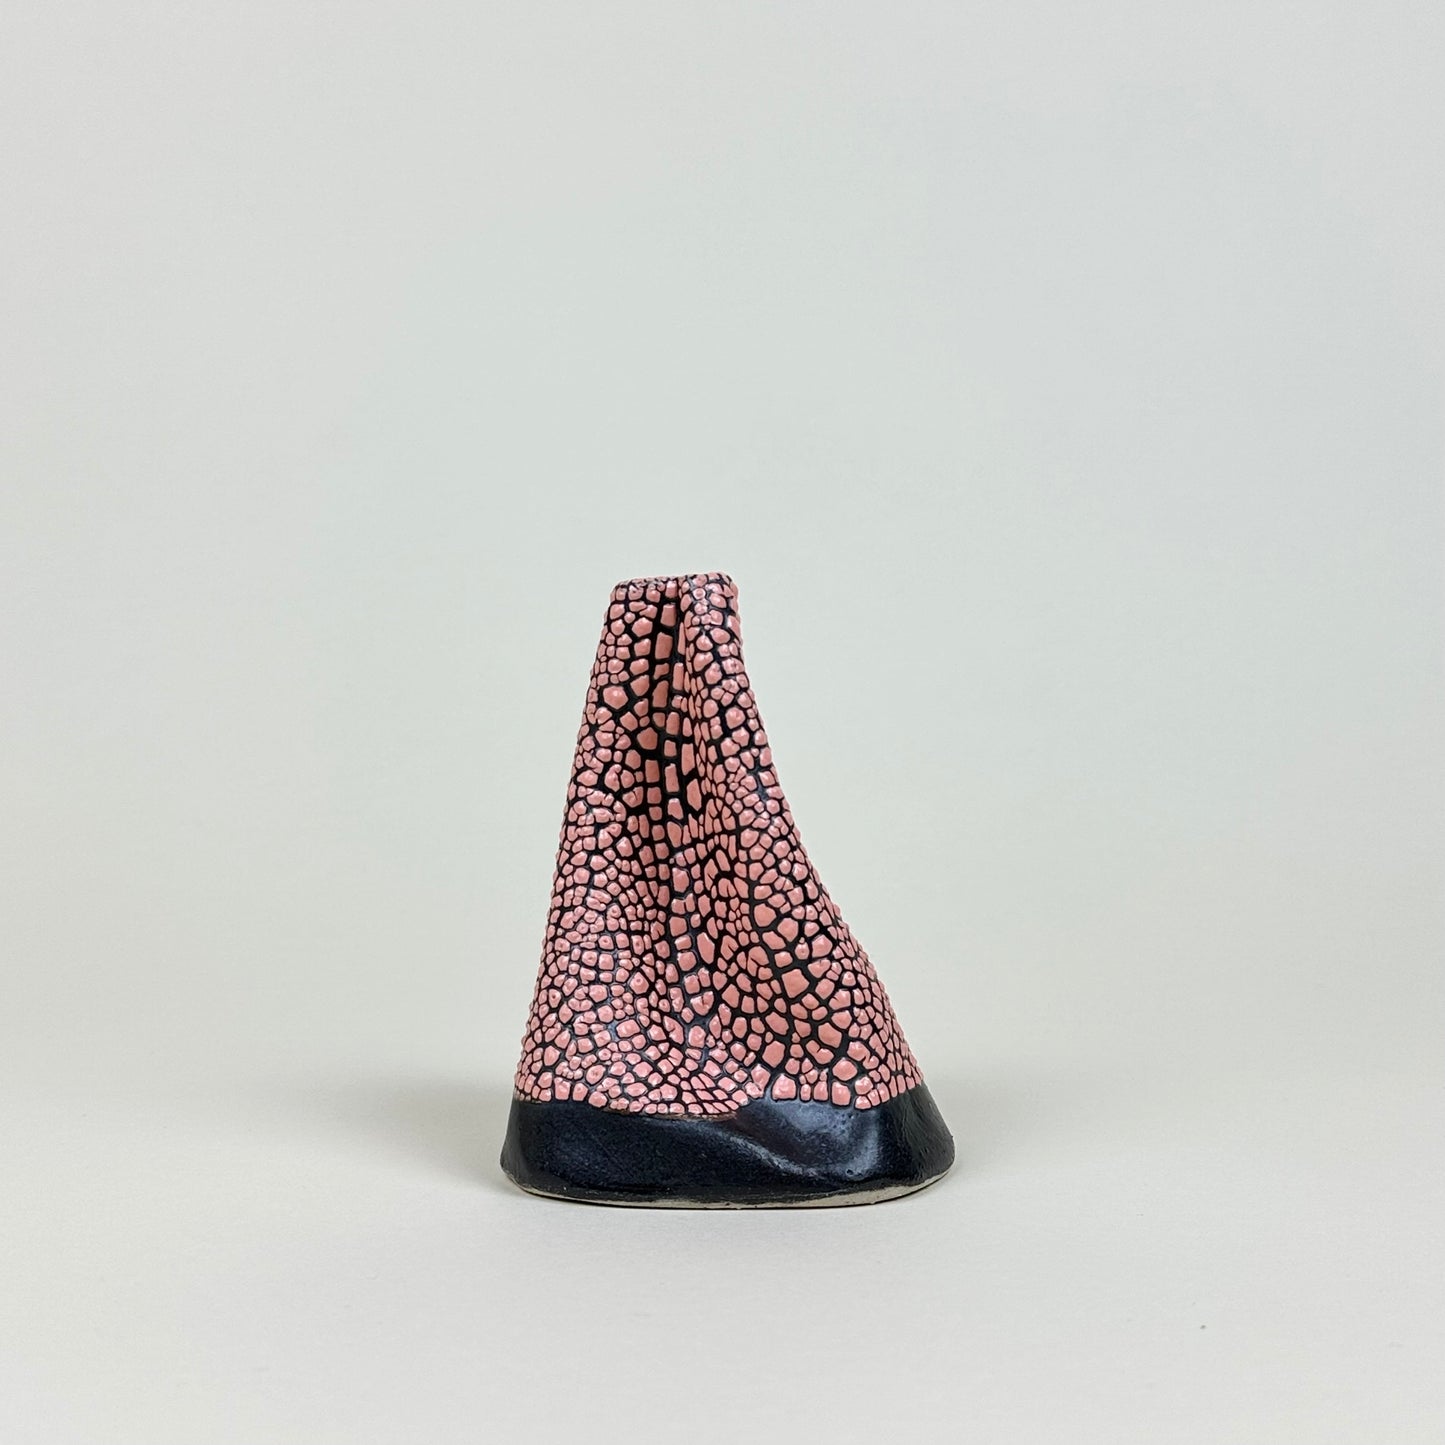 Navy and pink volcano vase (S) by Astrid Öhman